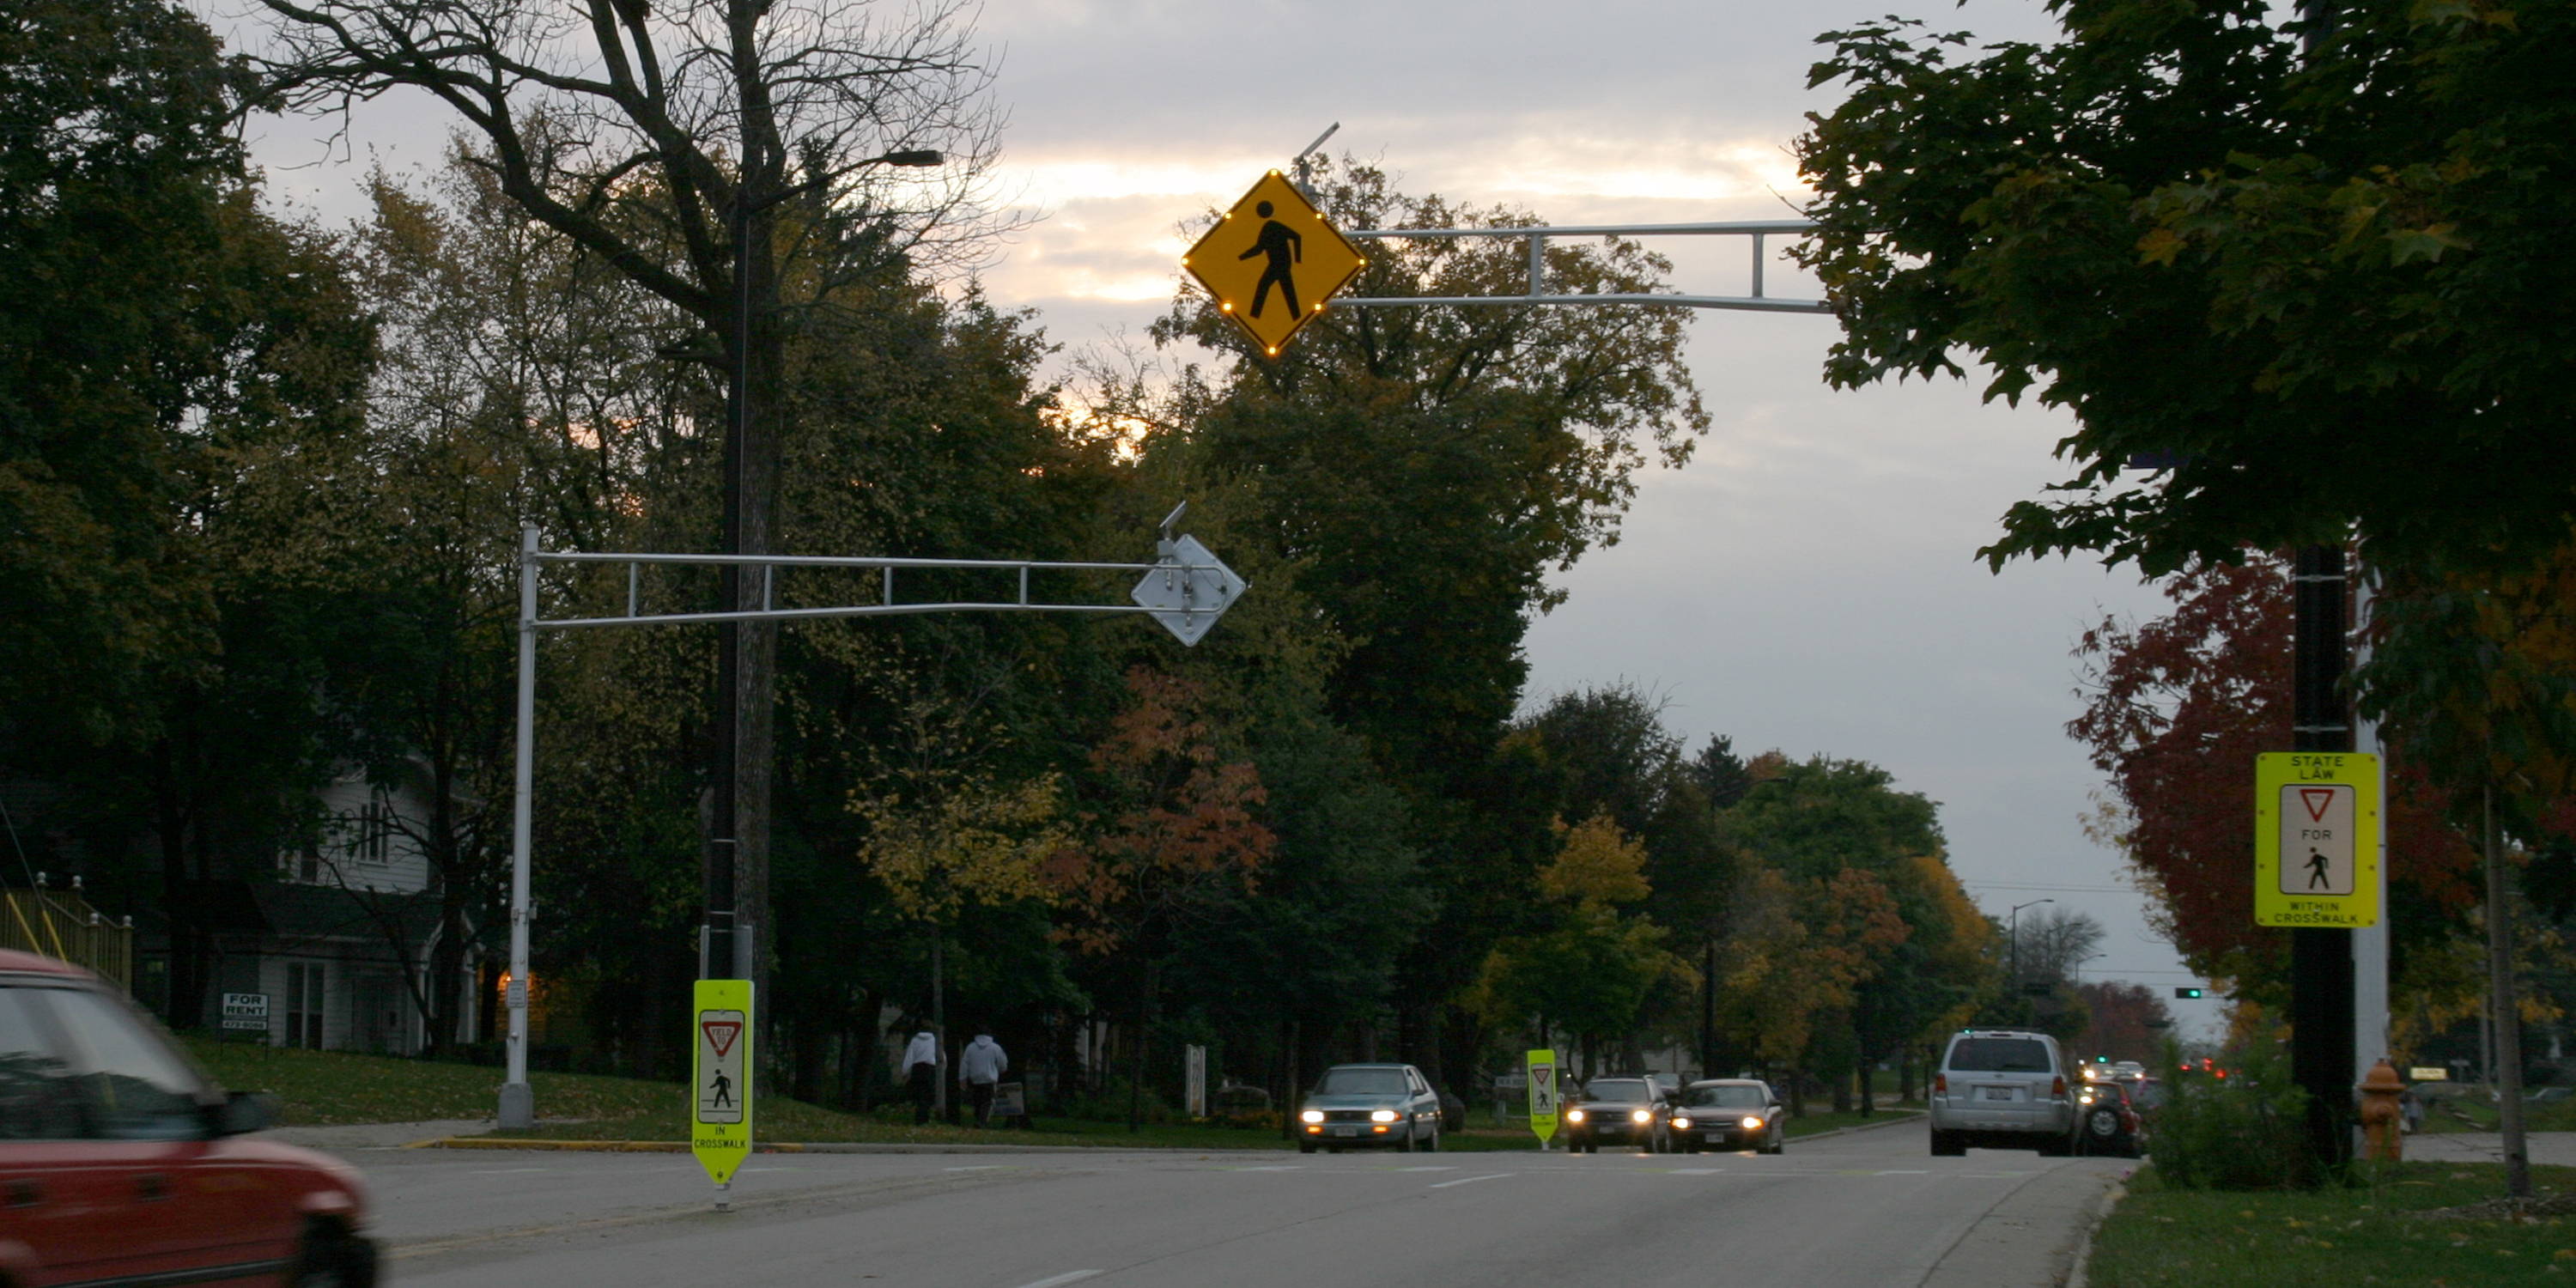 Overhead blinkersign giving drivers additional warning for pedestrians